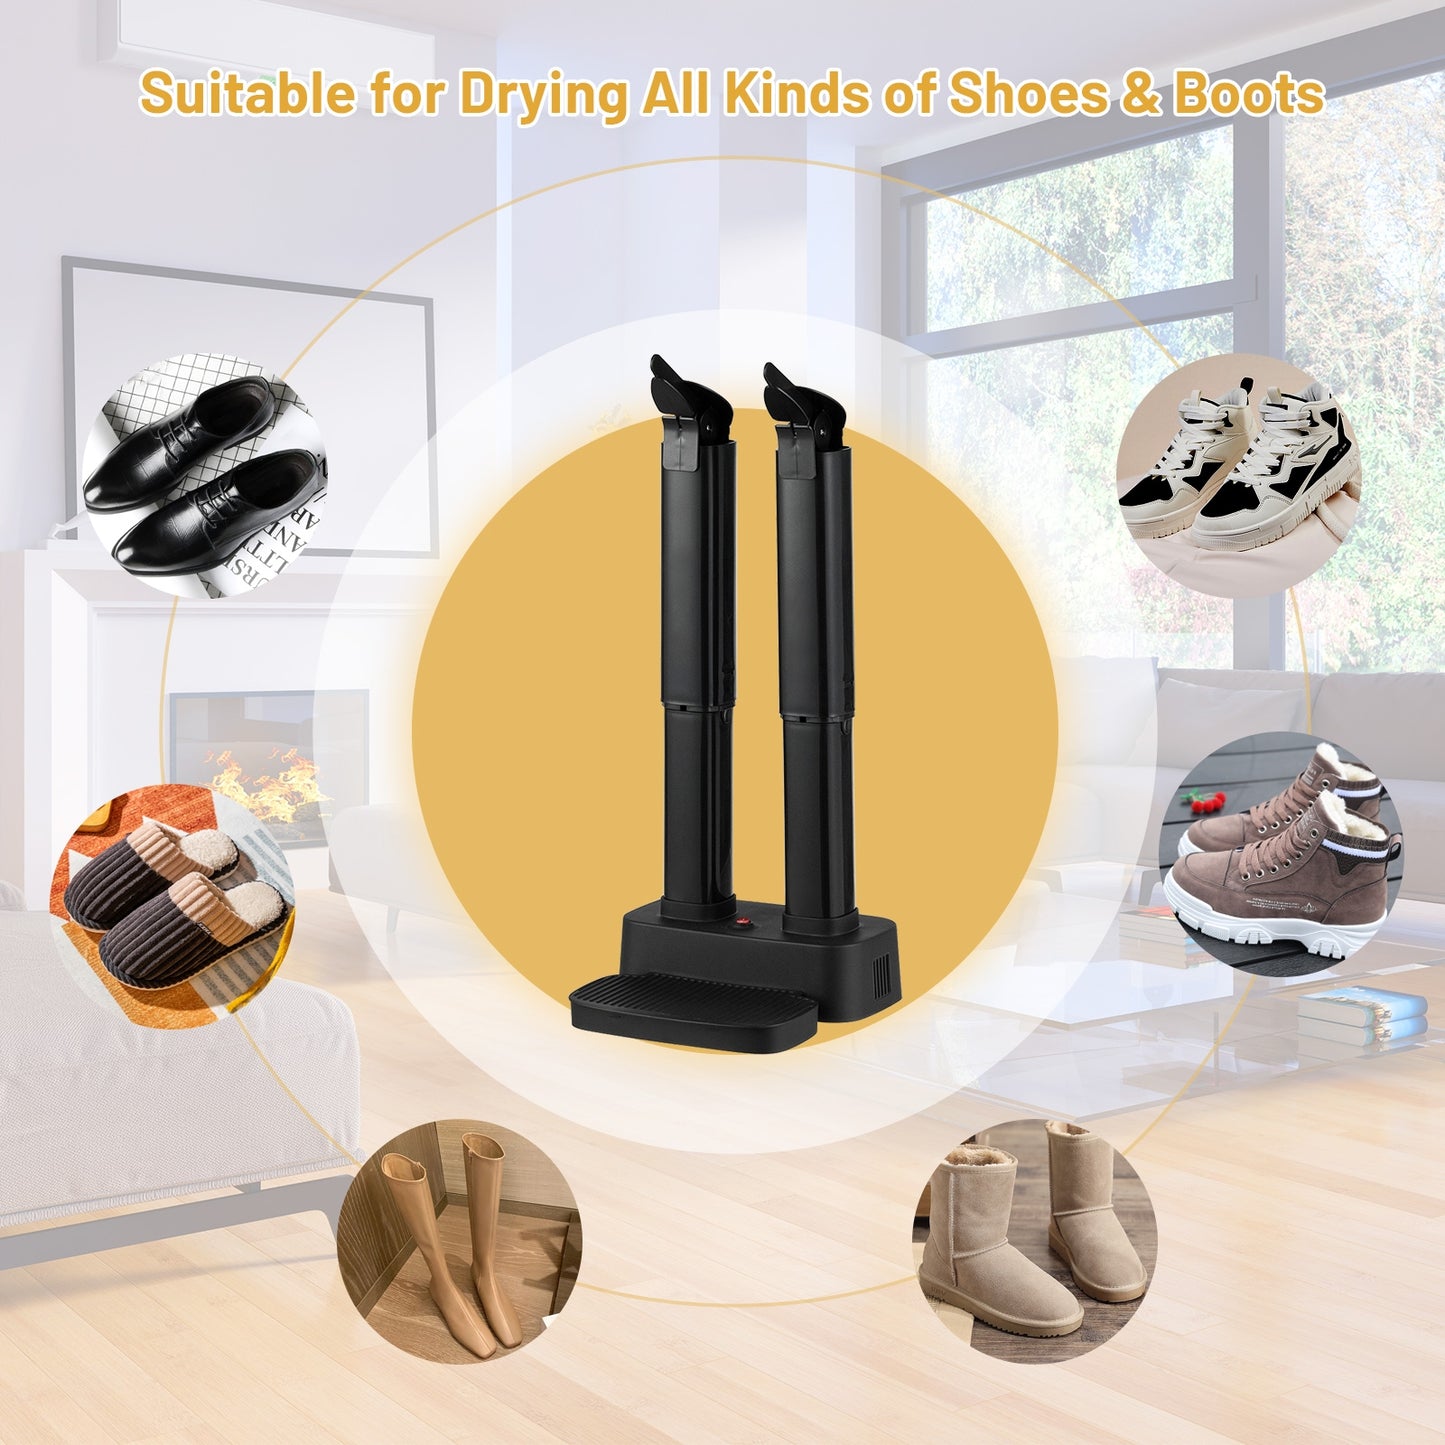 2-Shoe Electric Shoe Dryer with Portable Adjustable Warmer for Boots and Socks